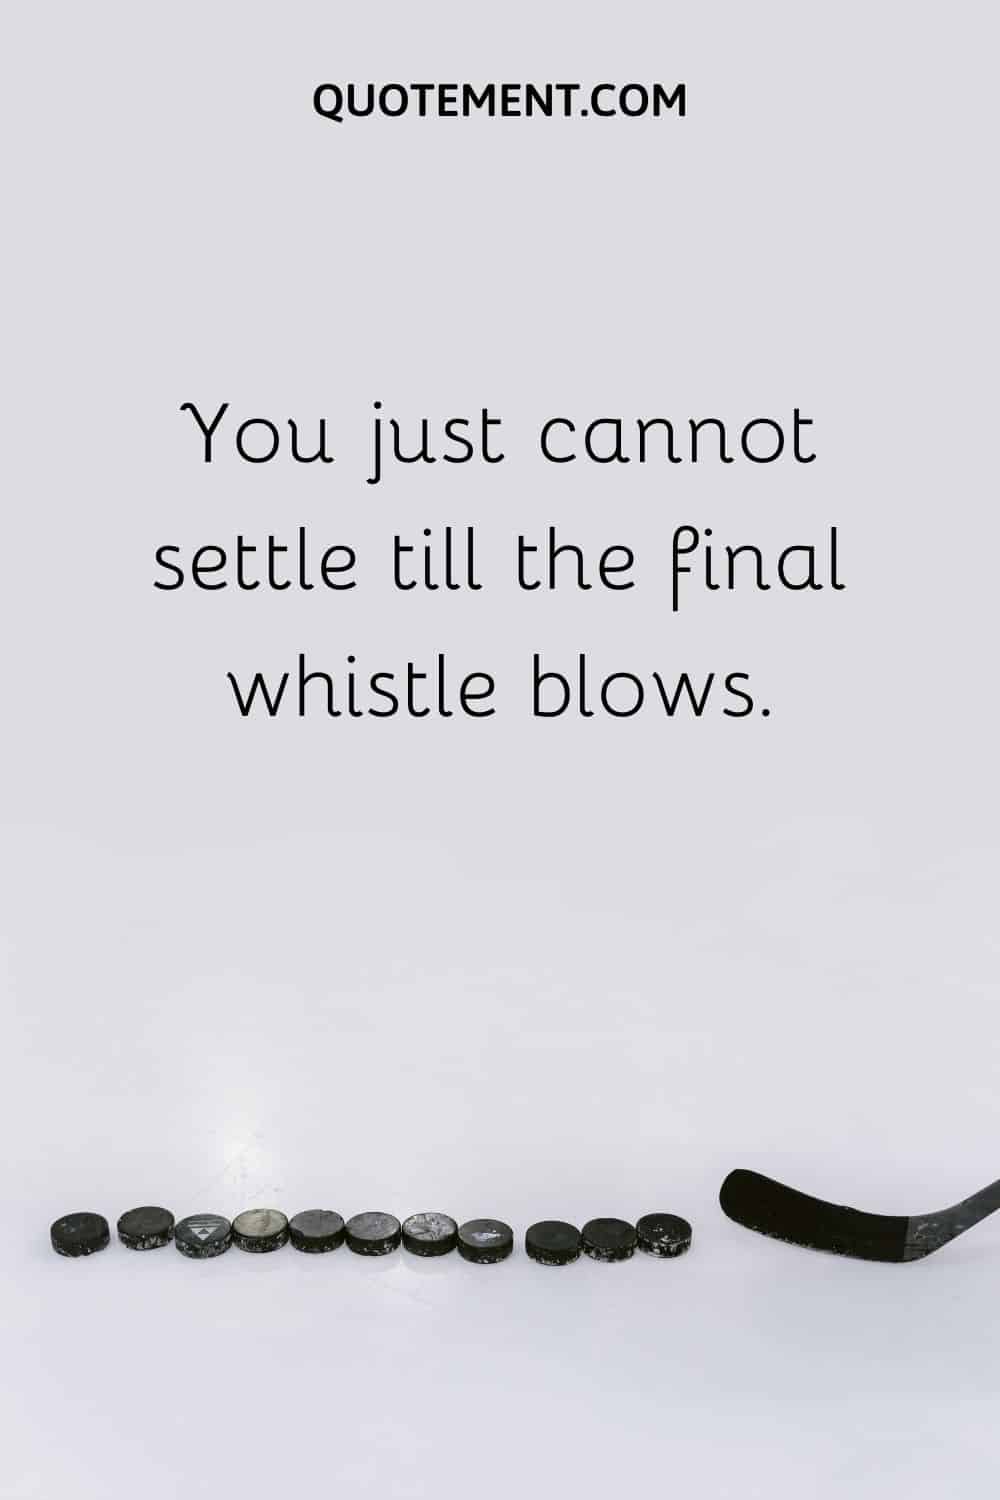 You just cannot settle till the final whistle blows.